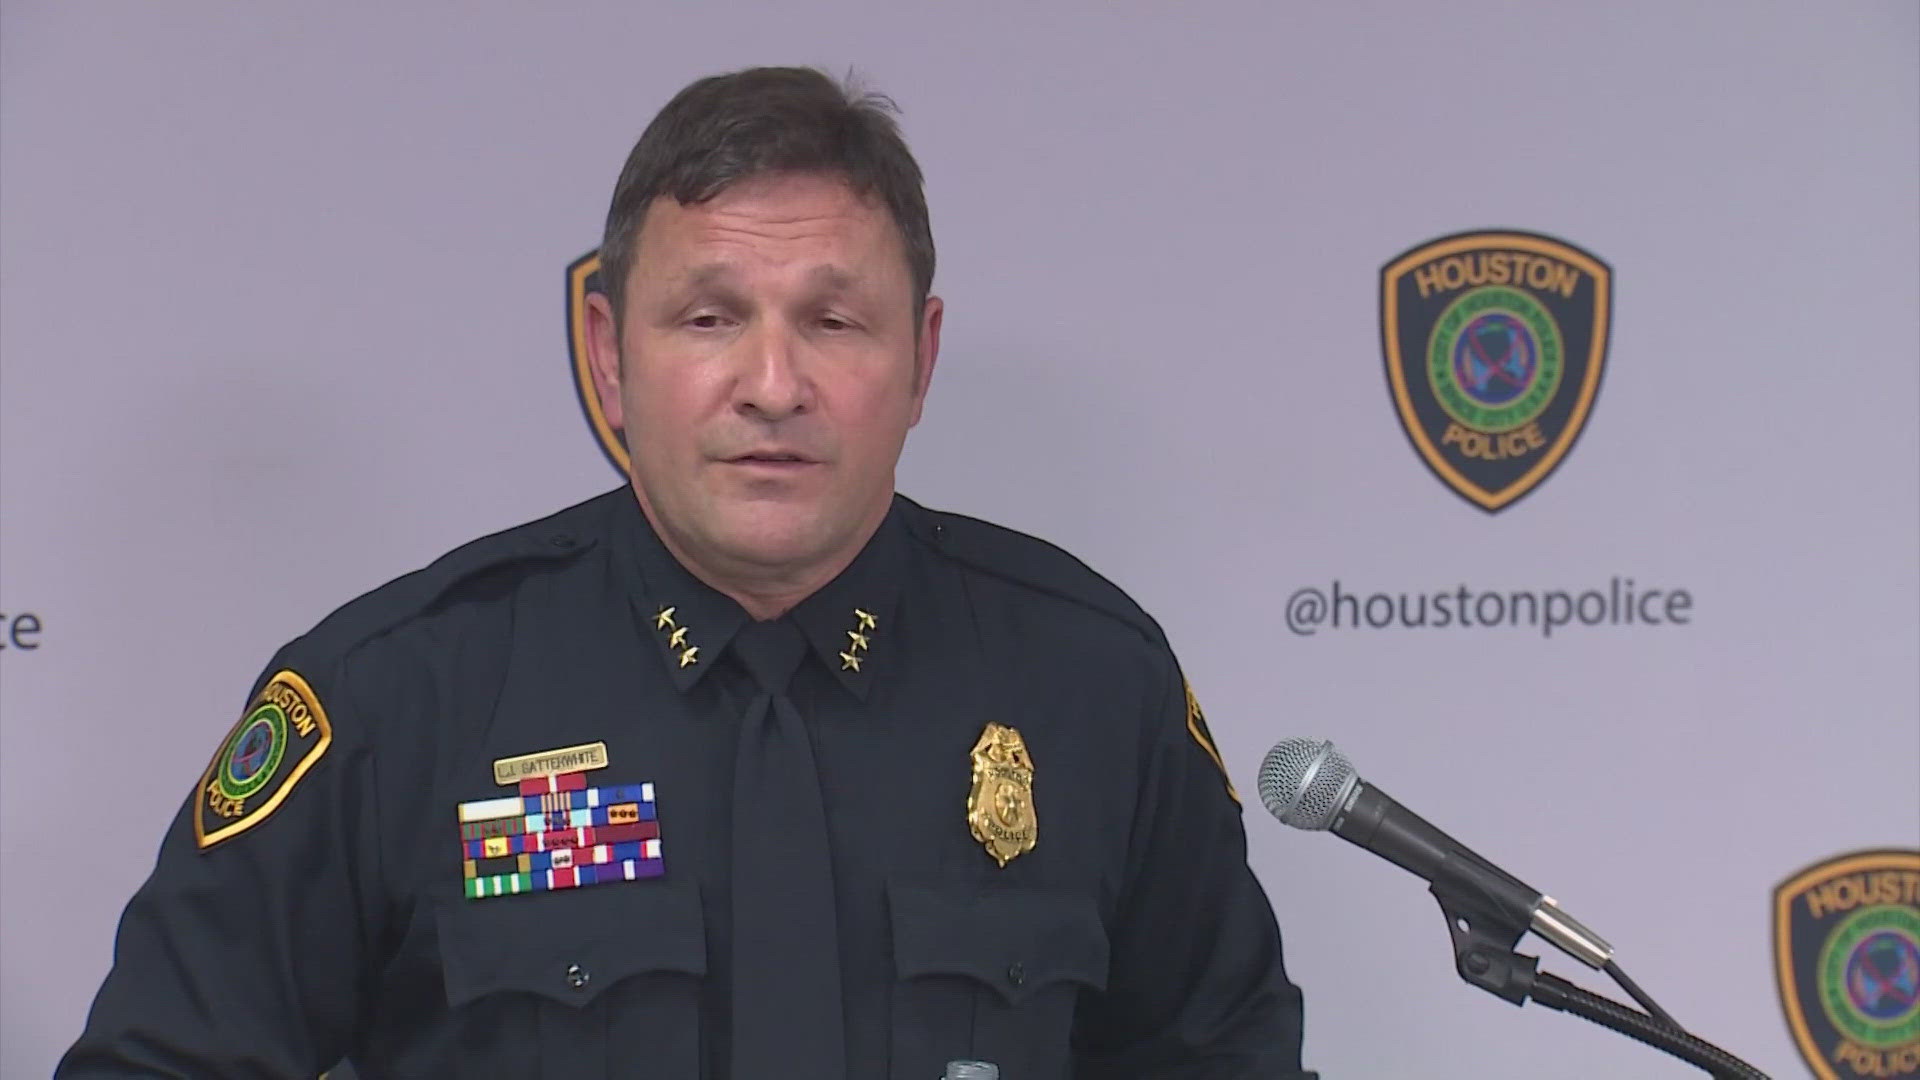 Larry Satterwhite was announced as the Houston Police Department's acting police chief after Troy Finner retired on Tuesday, May 7.